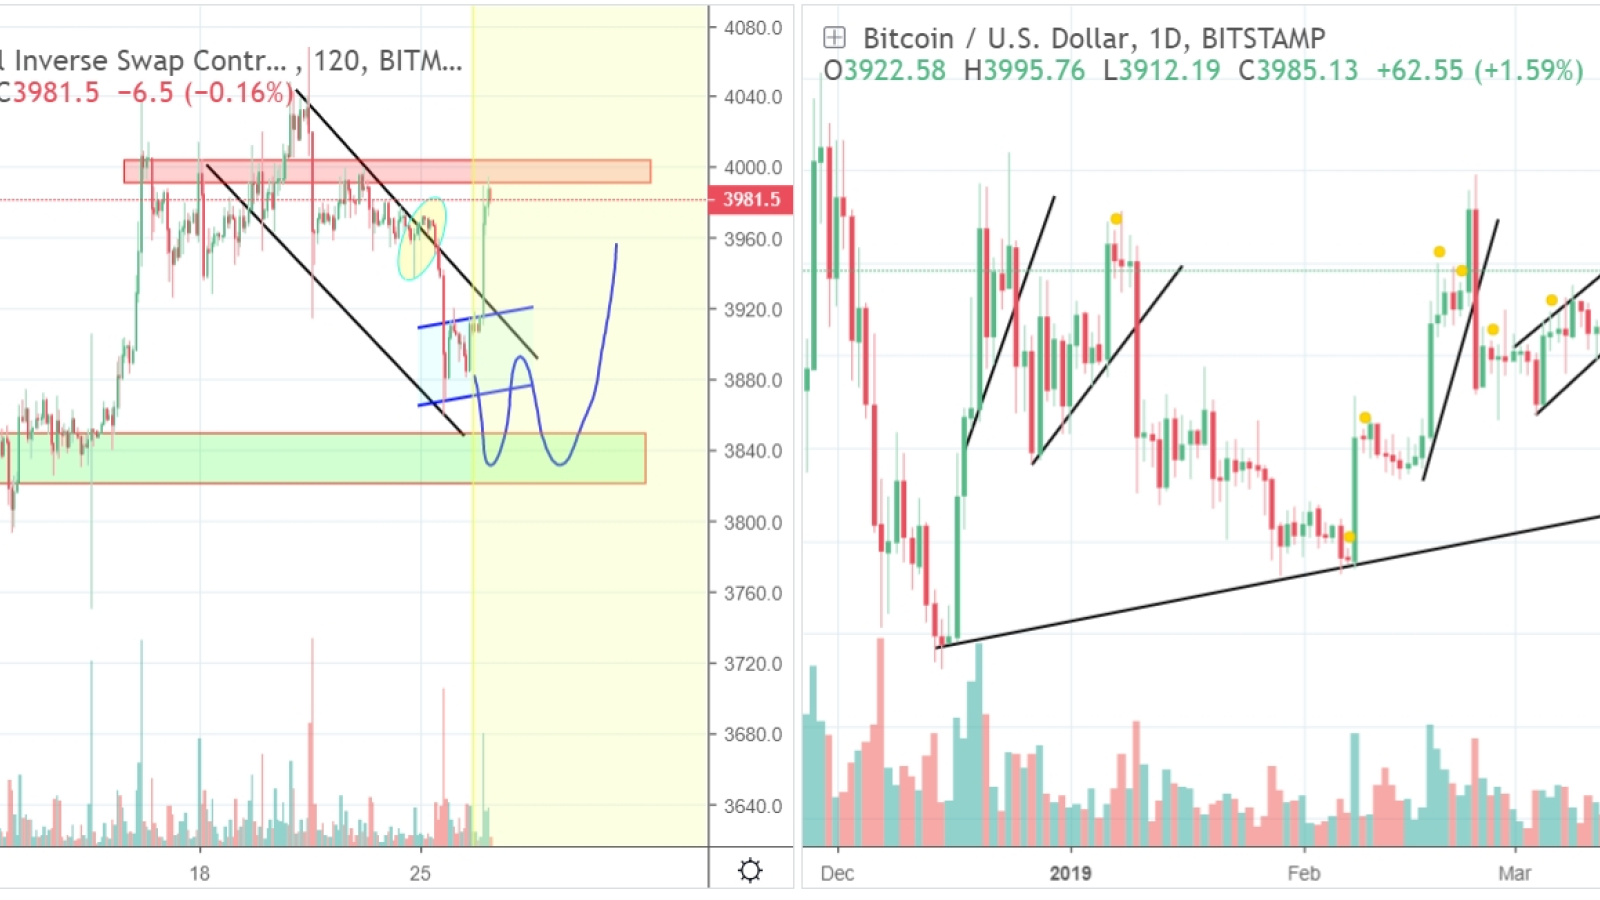 If BTC fails $3,700 support zone, it will fall further